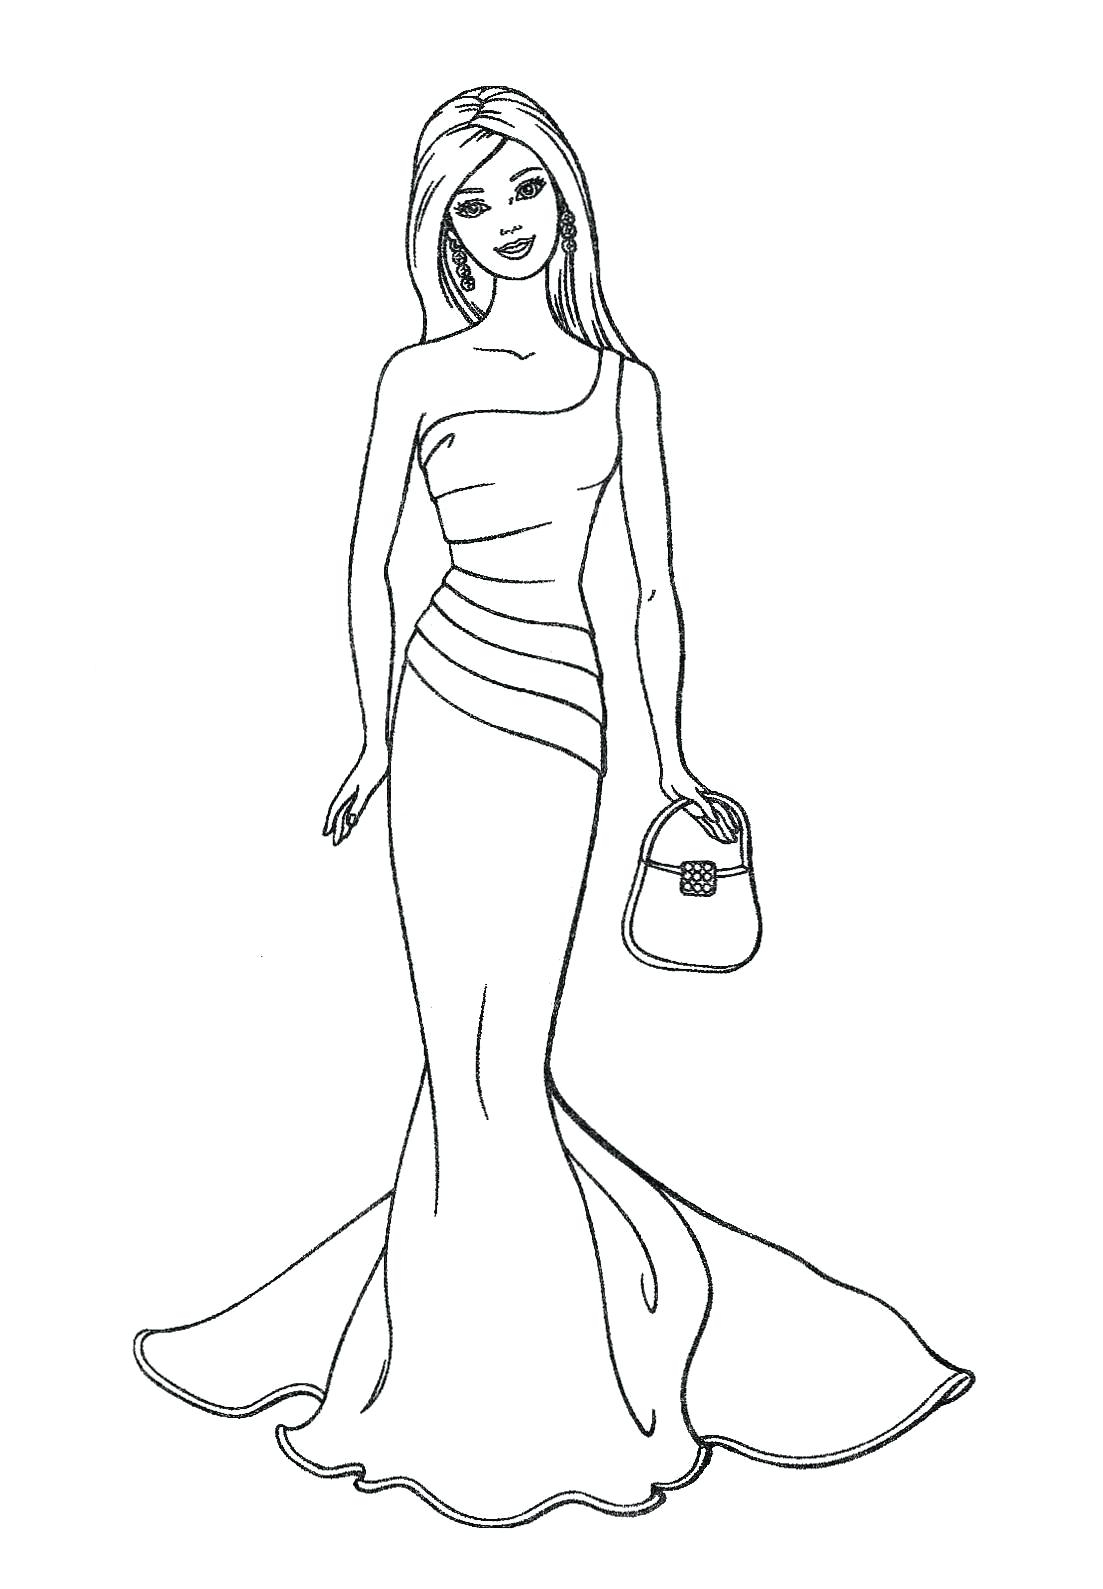 Ballerina Coloring Pages For Kids Free Ballerina Coloring Pages Eastbaypaperco